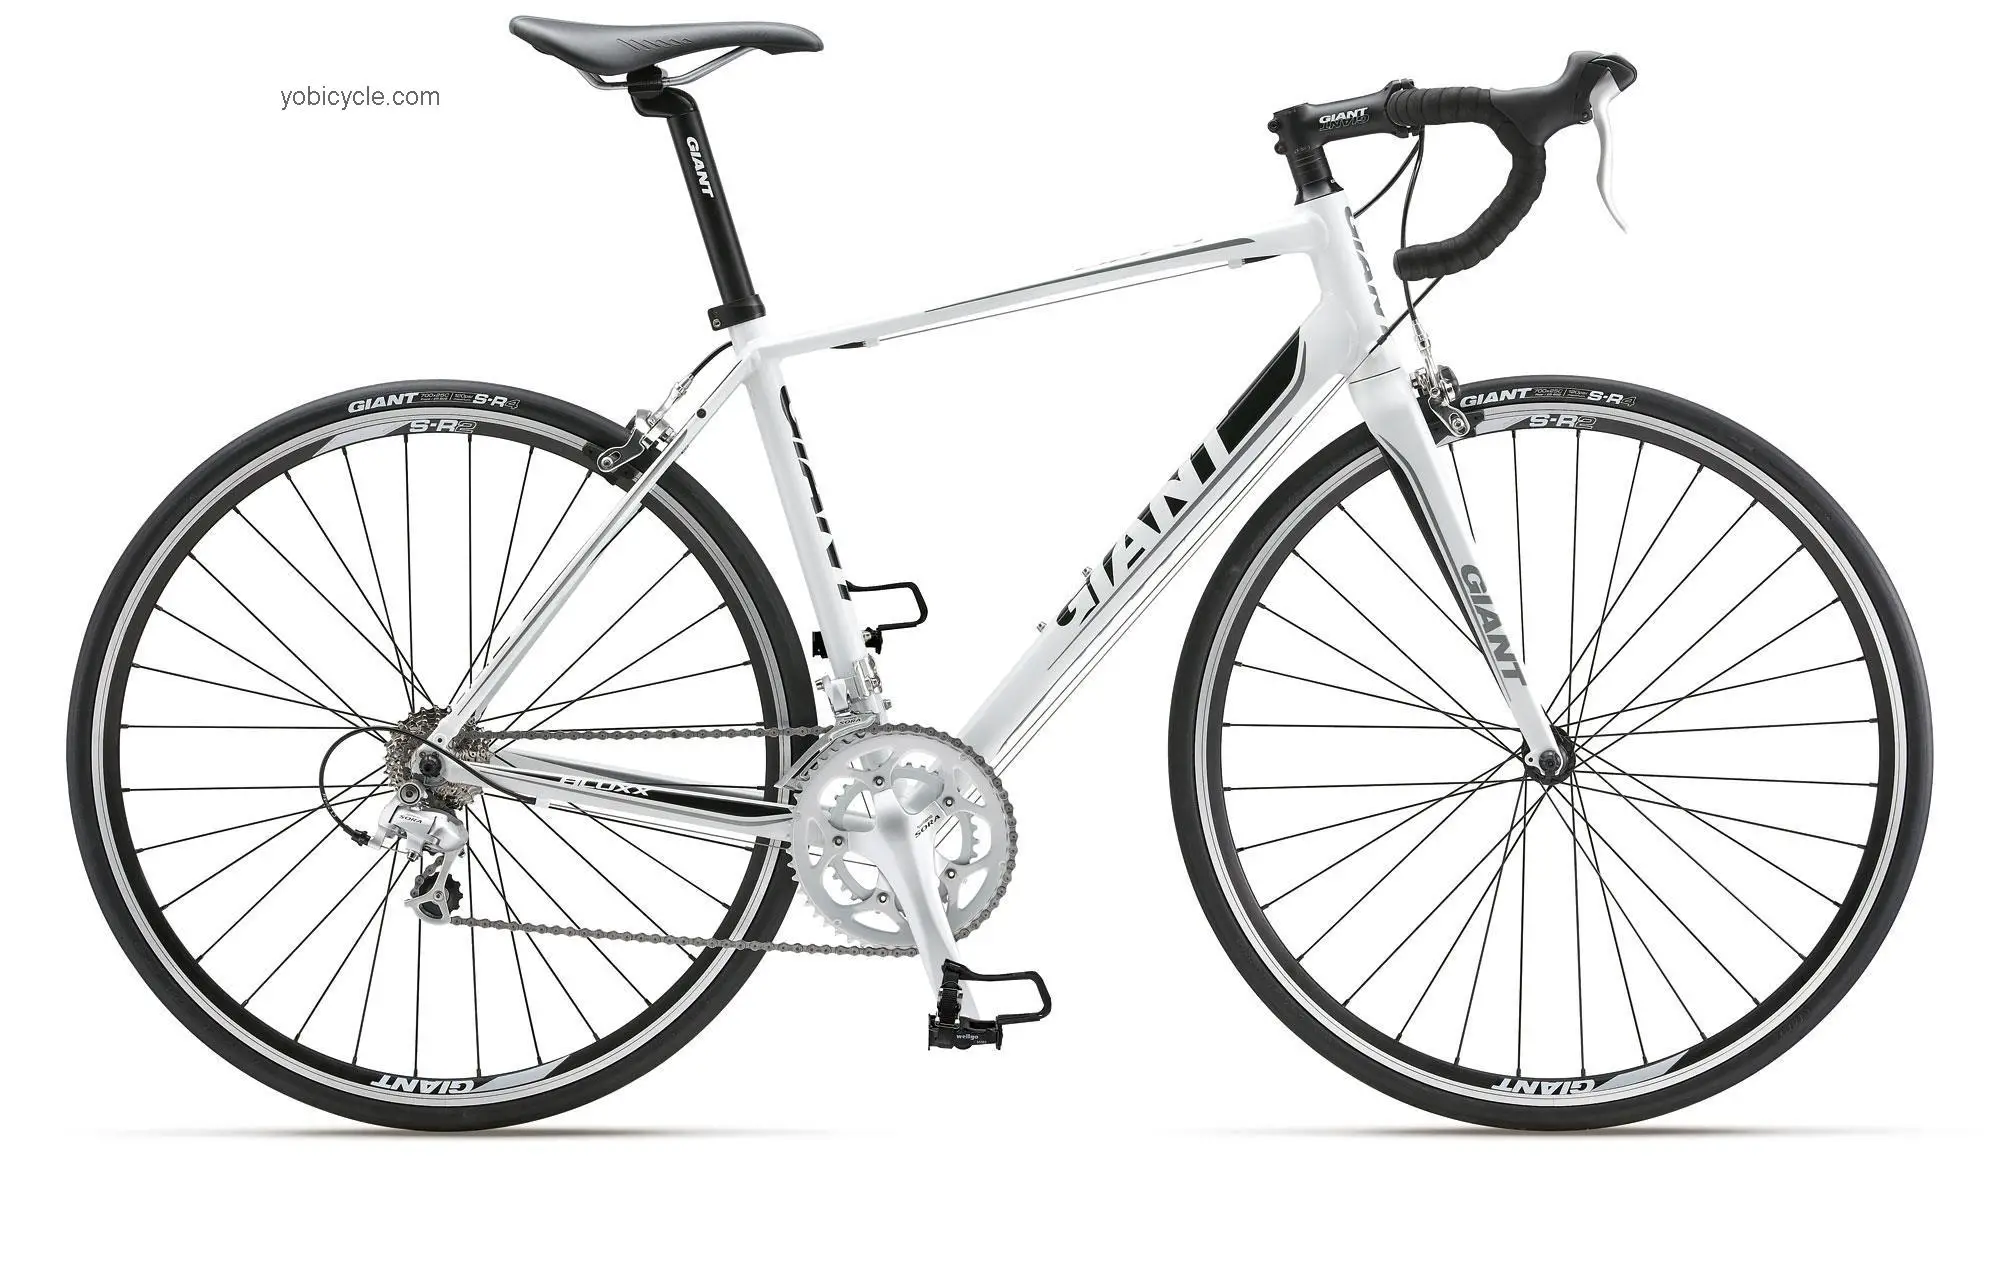 Giant Defy 3 Compact 2012 comparison online with competitors